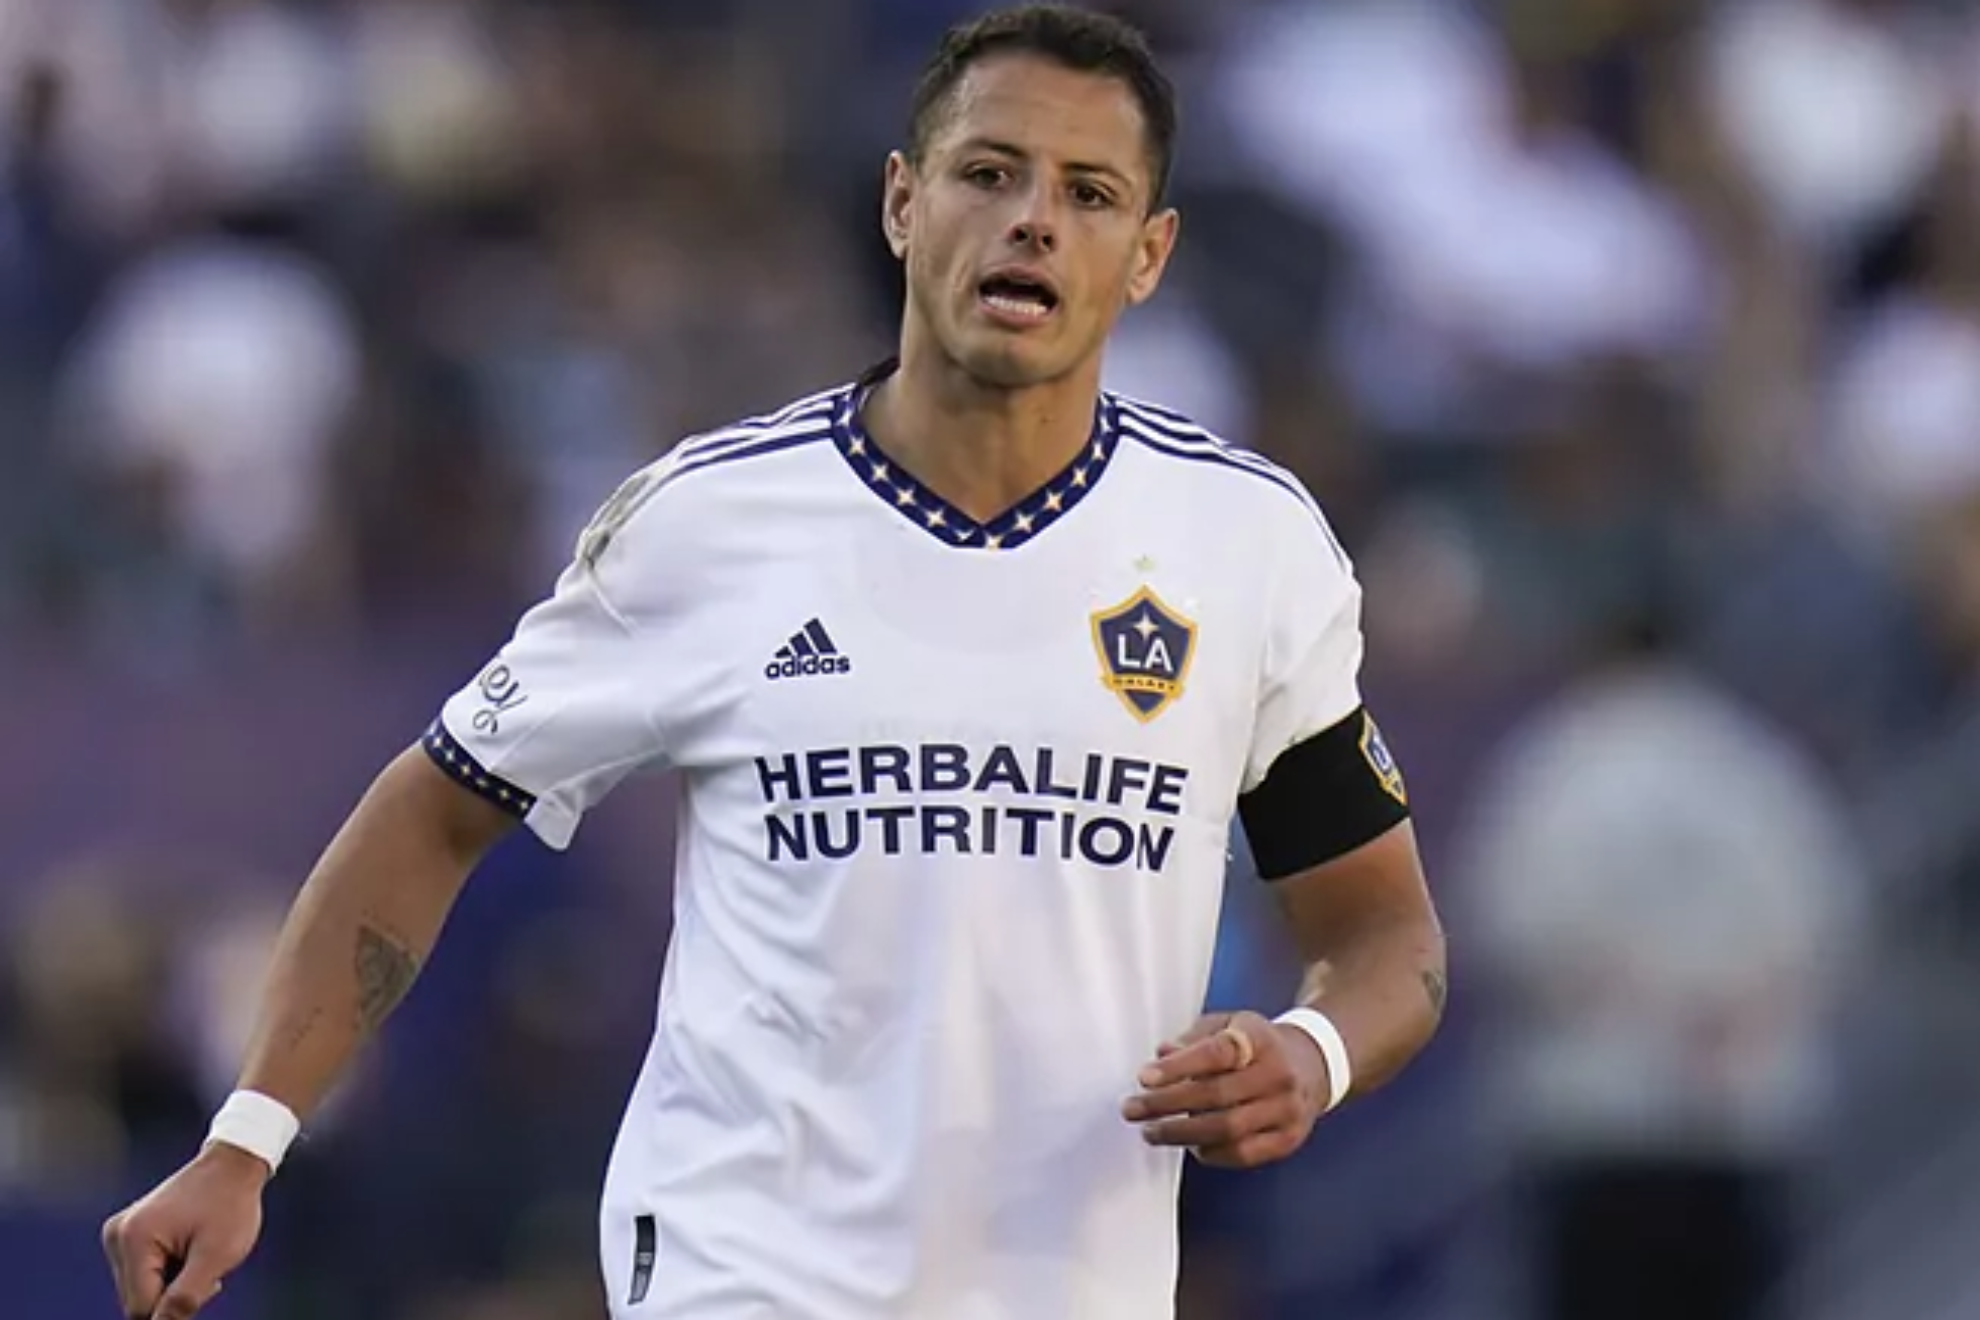 Chicharito Hernandez and his goals are needed as LA Galaxy search for their first victory